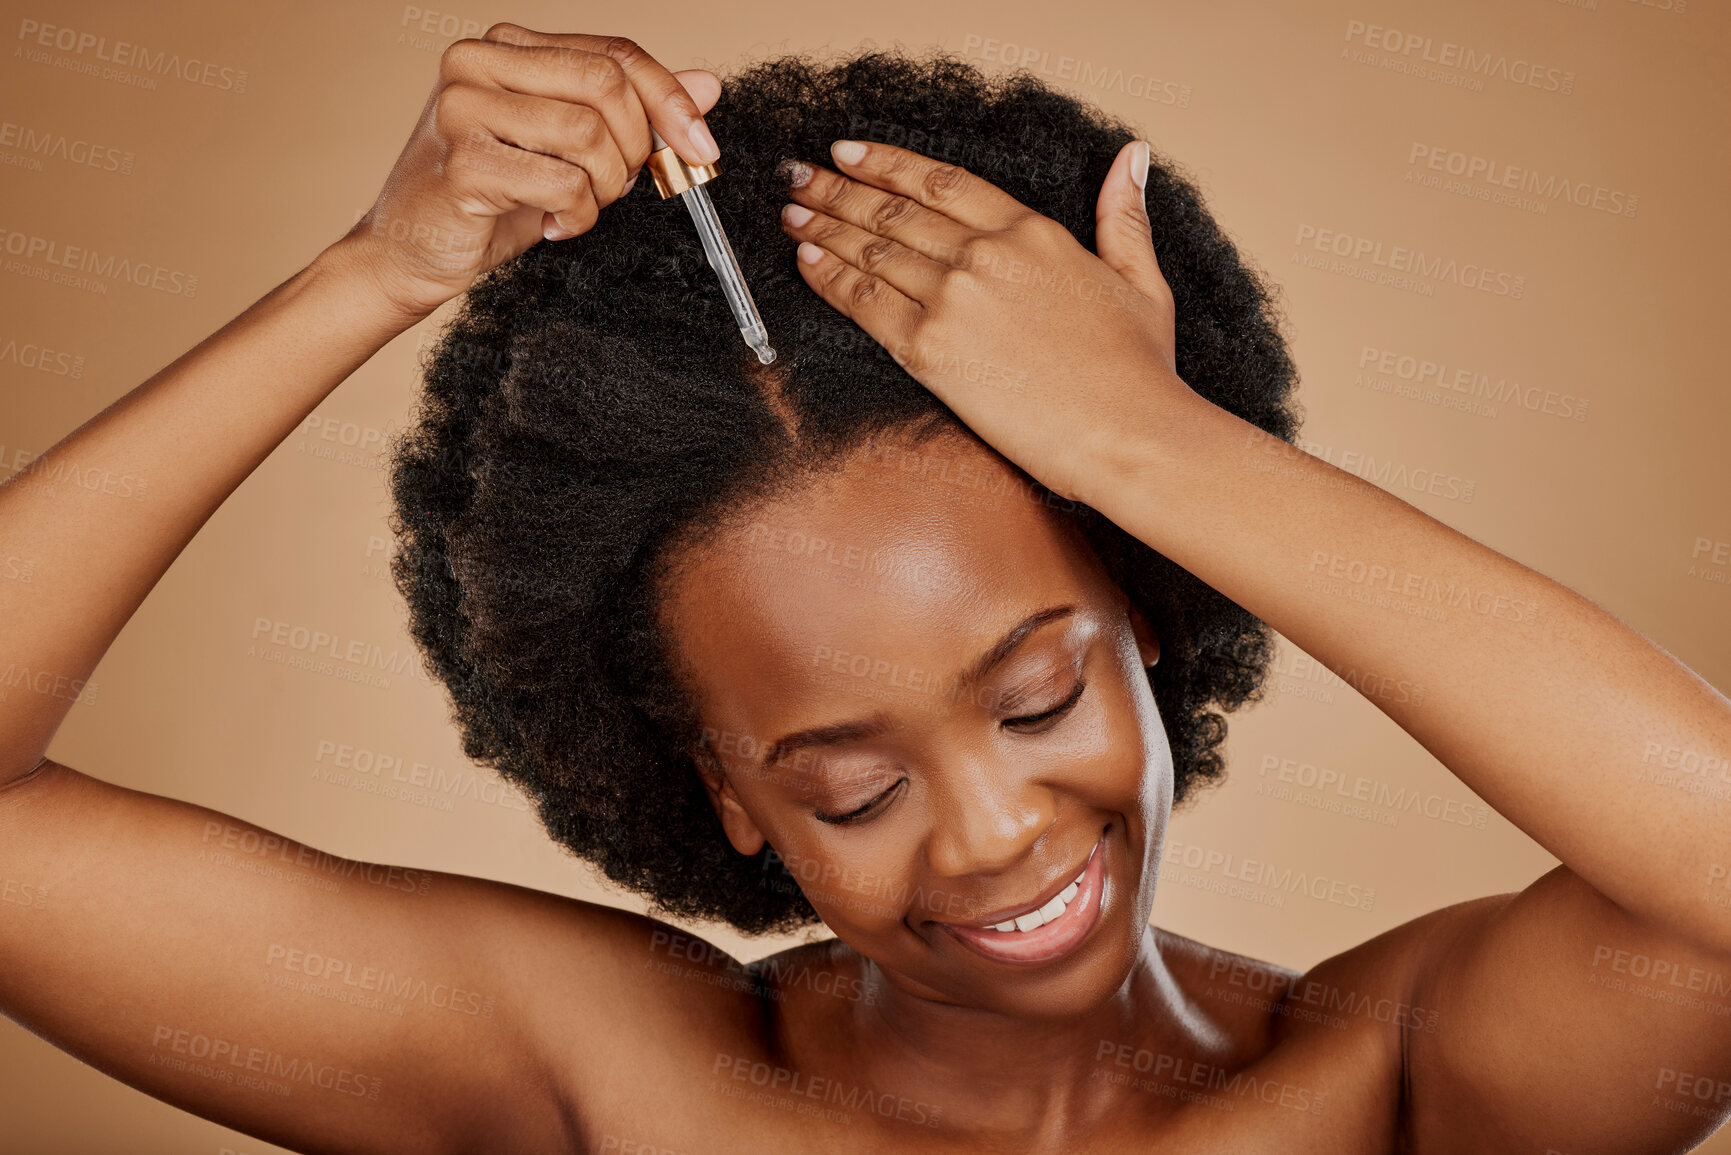 Buy stock photo Oil serum, hair care or black woman with afro in studio on brown background for a healthy scalp. Smile, pipette or natural African girl at hairdresser salon for hairstyle treatment or beauty makeover